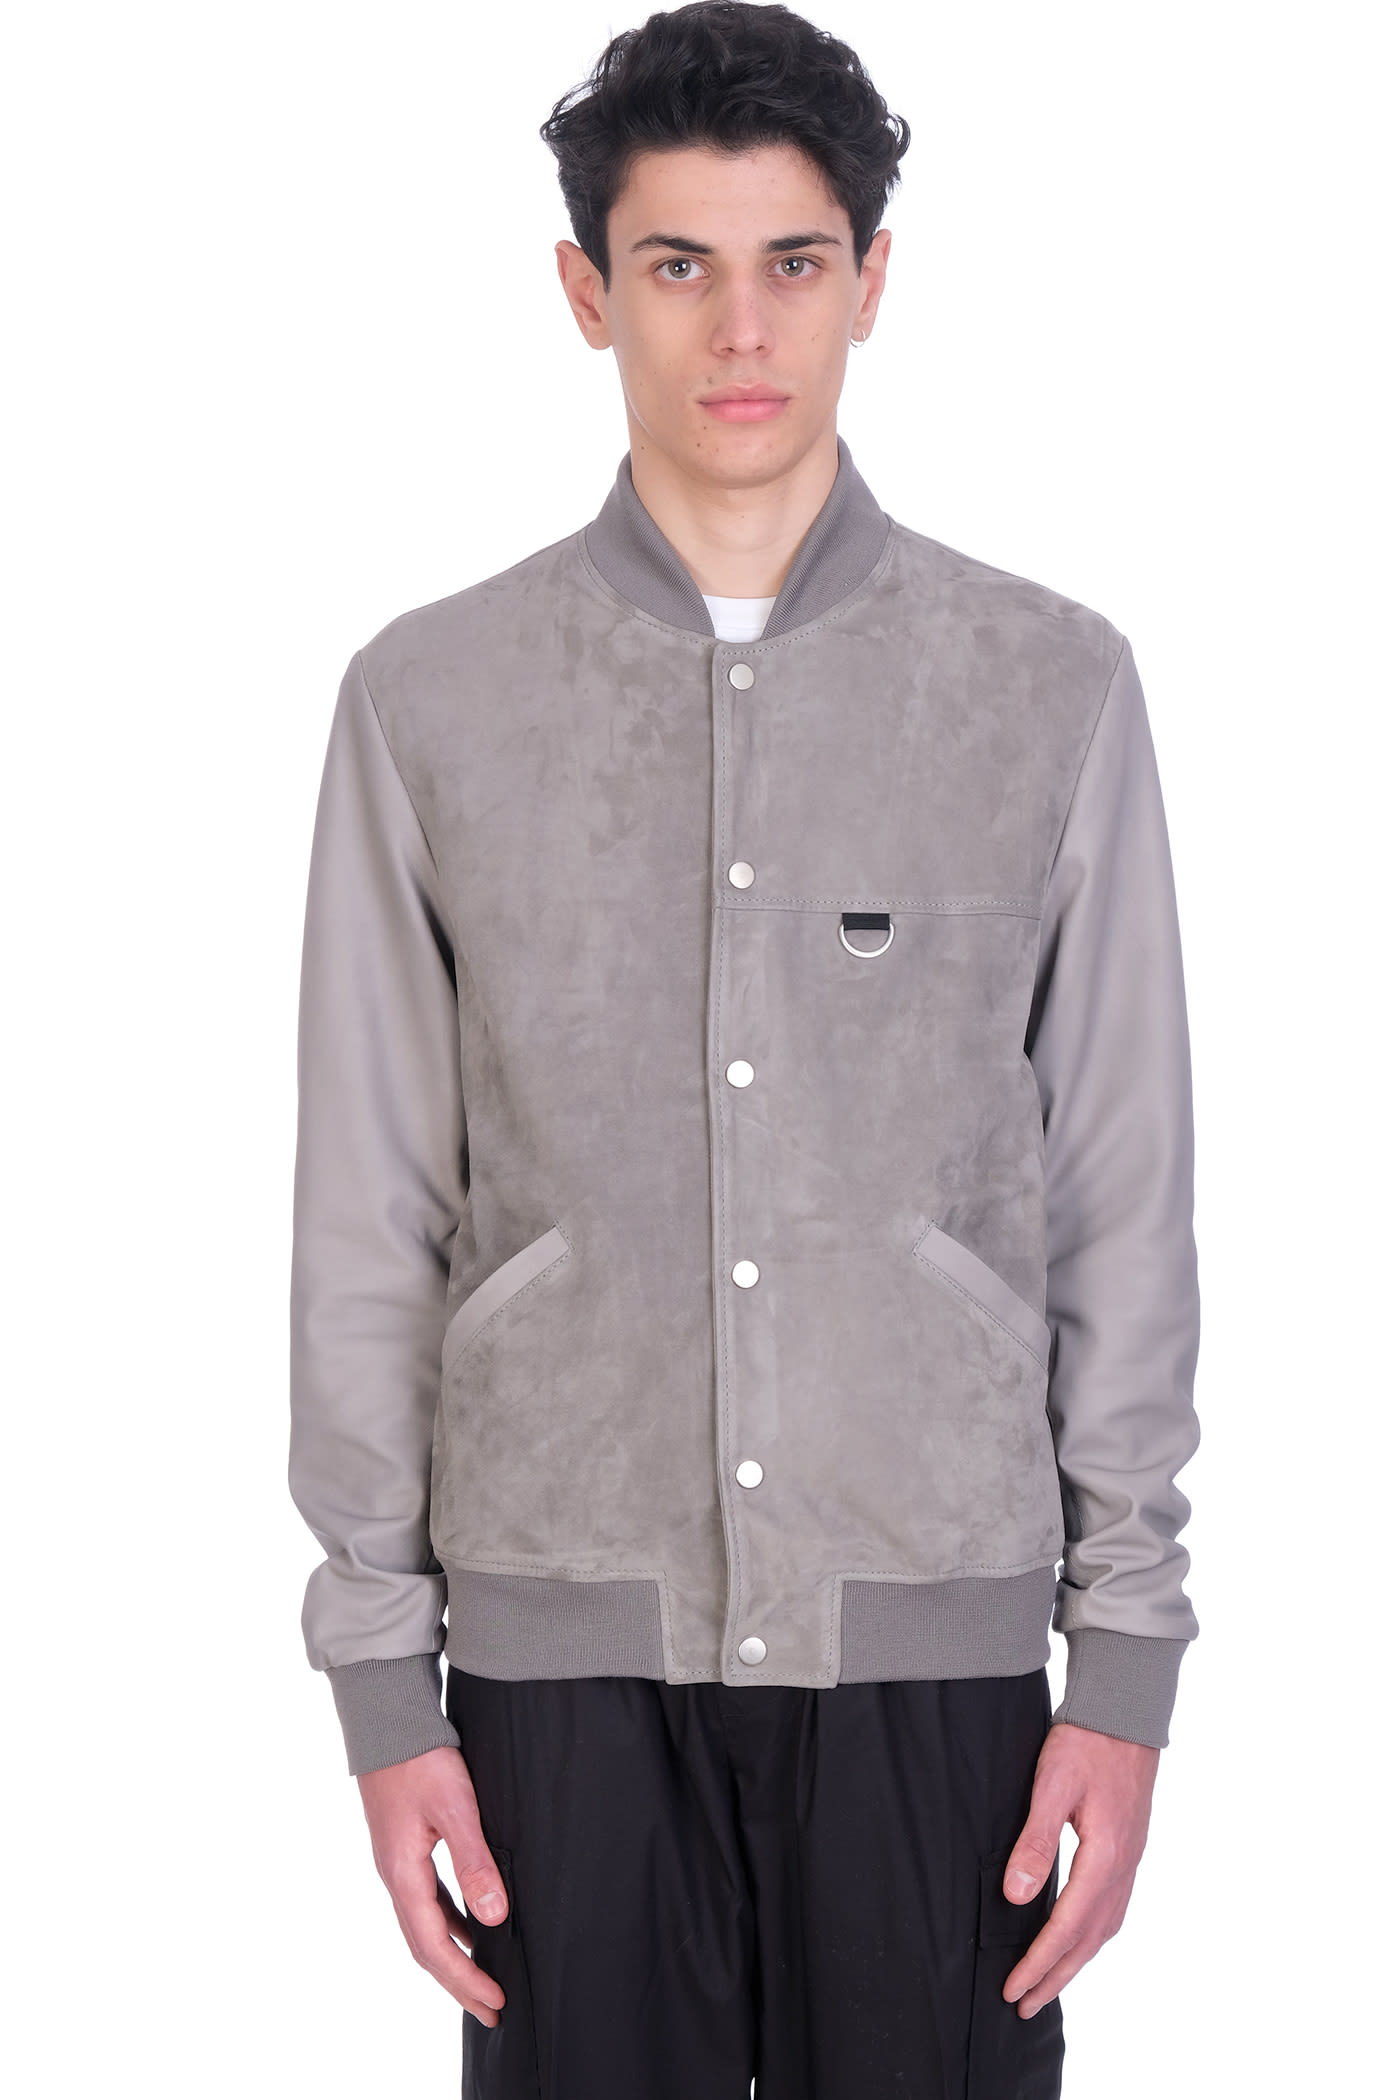 Low Brand Bomber In Grey Suede And Leather